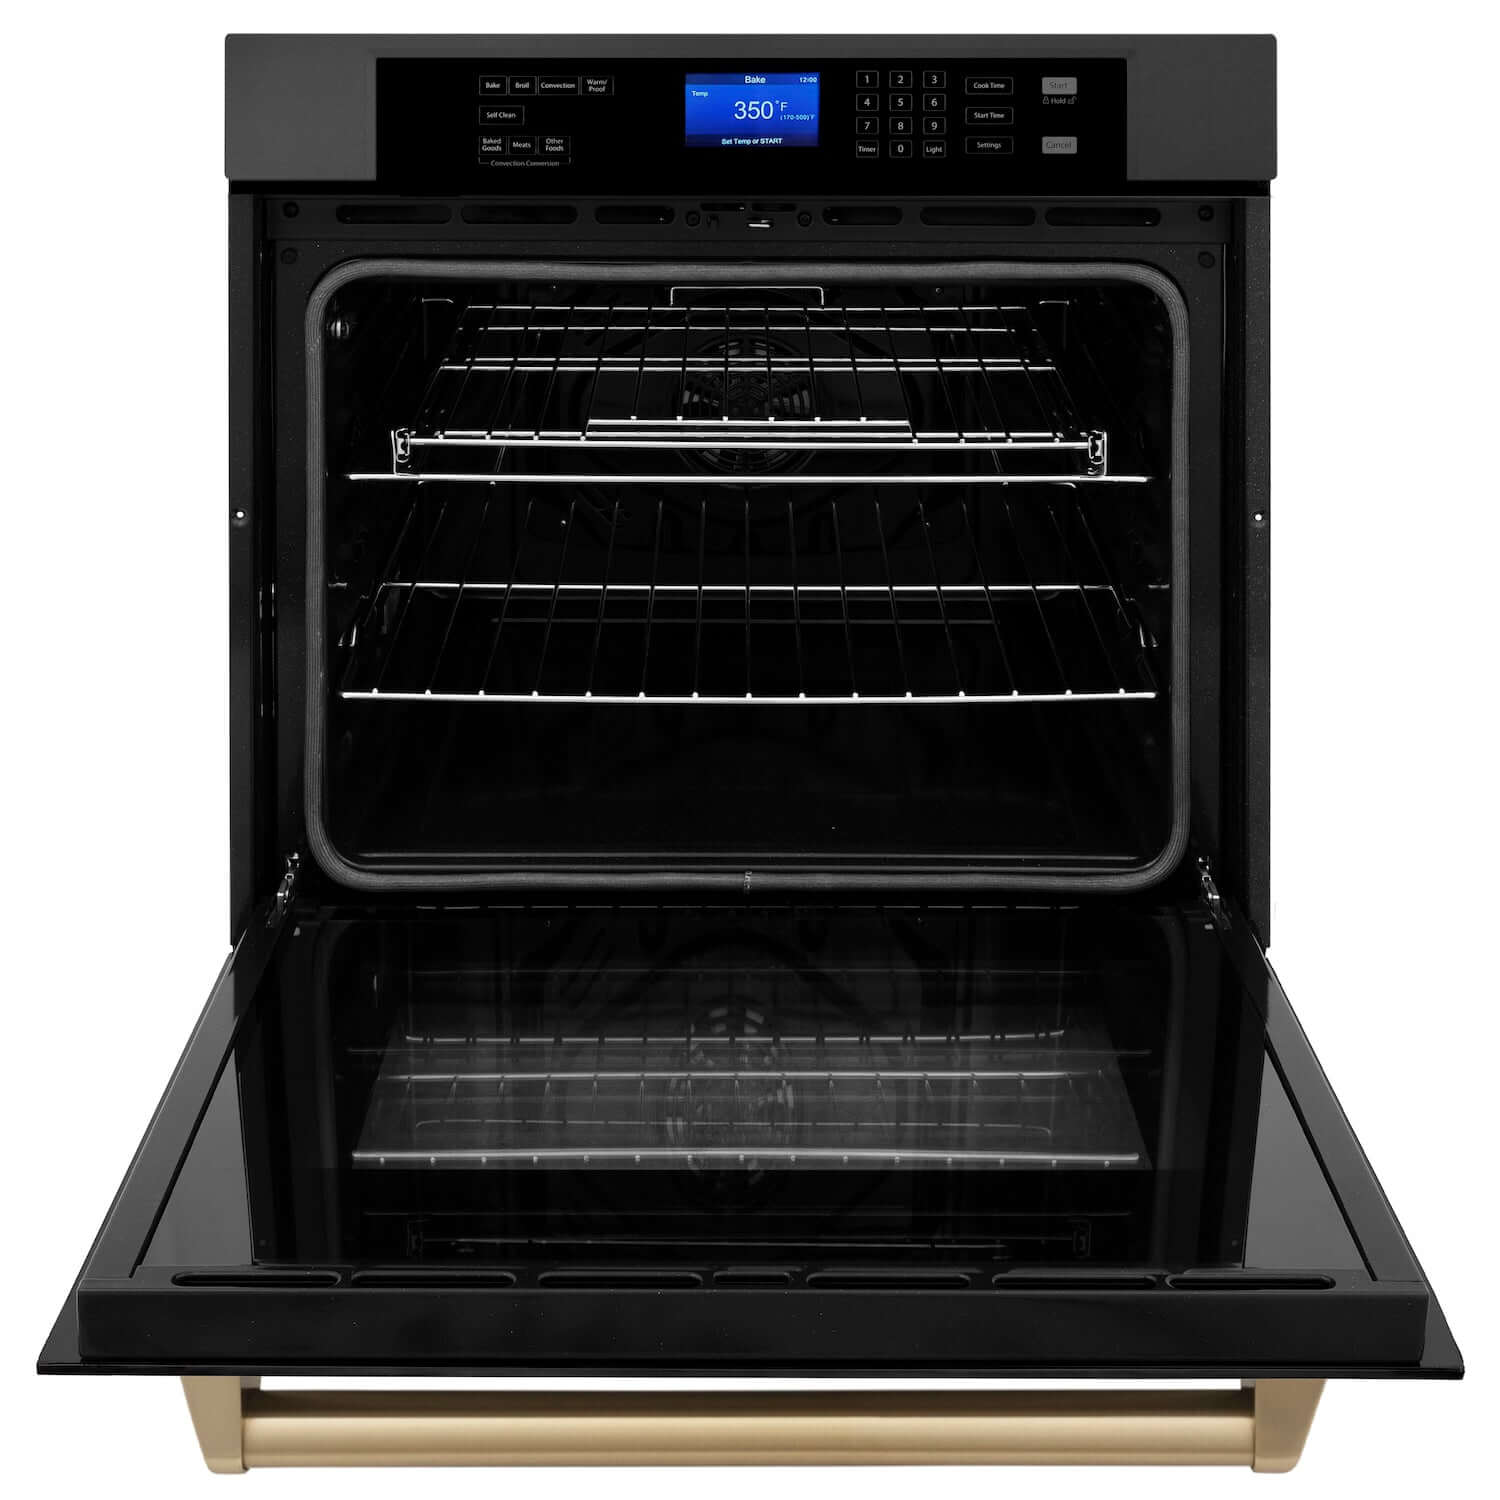 ZLINE Autograph Edition 30 in. Single Wall Oven with Self Clean and True Convection in Black Stainless Steel and Champagne Bronze Accents (AWSZ-30-BS-CB) front, open.